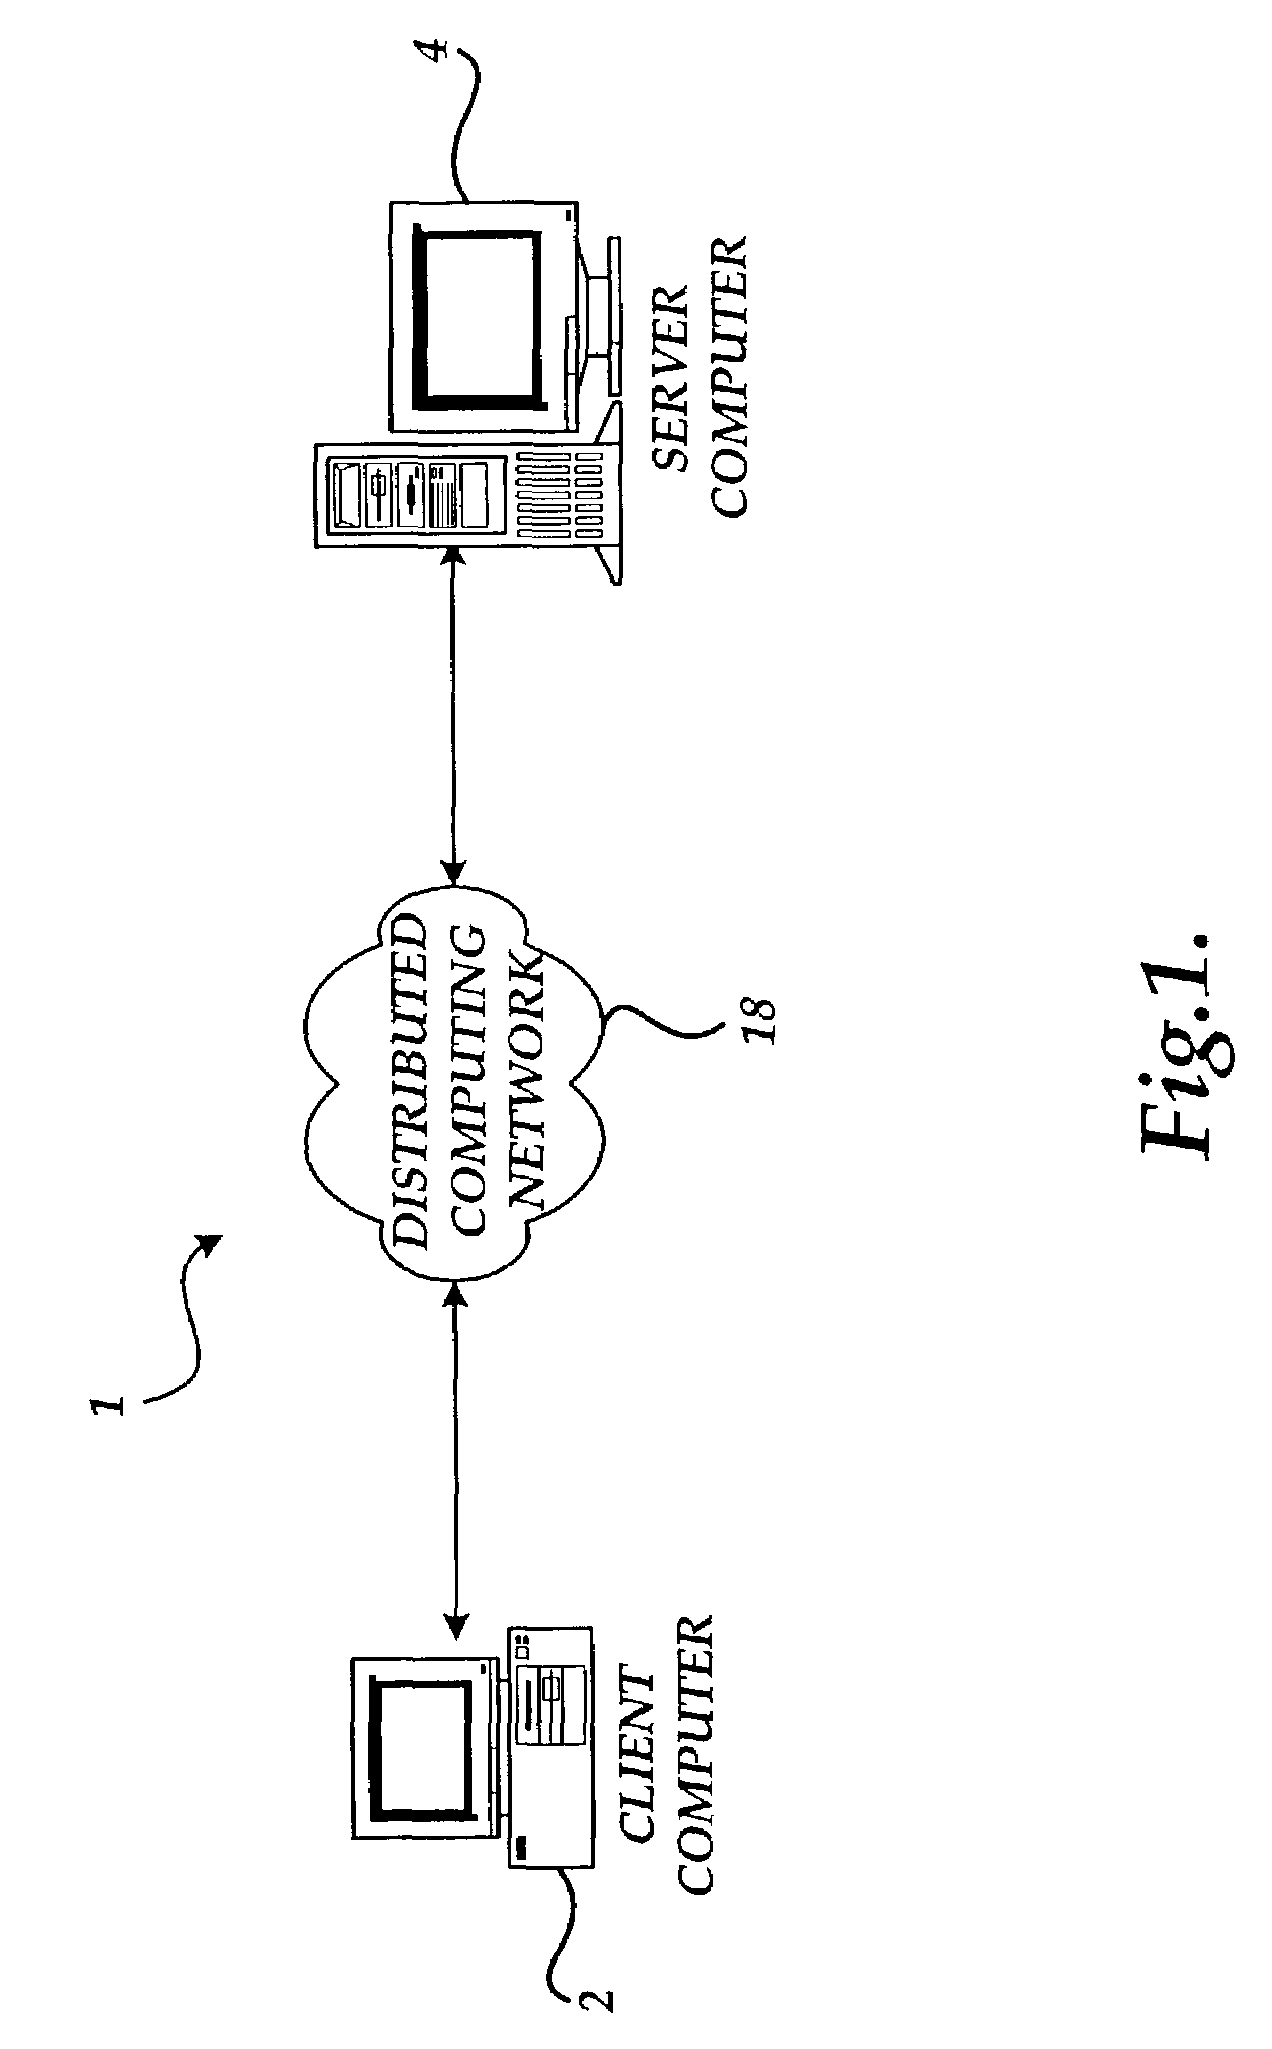 Method and apparatus for managing list items